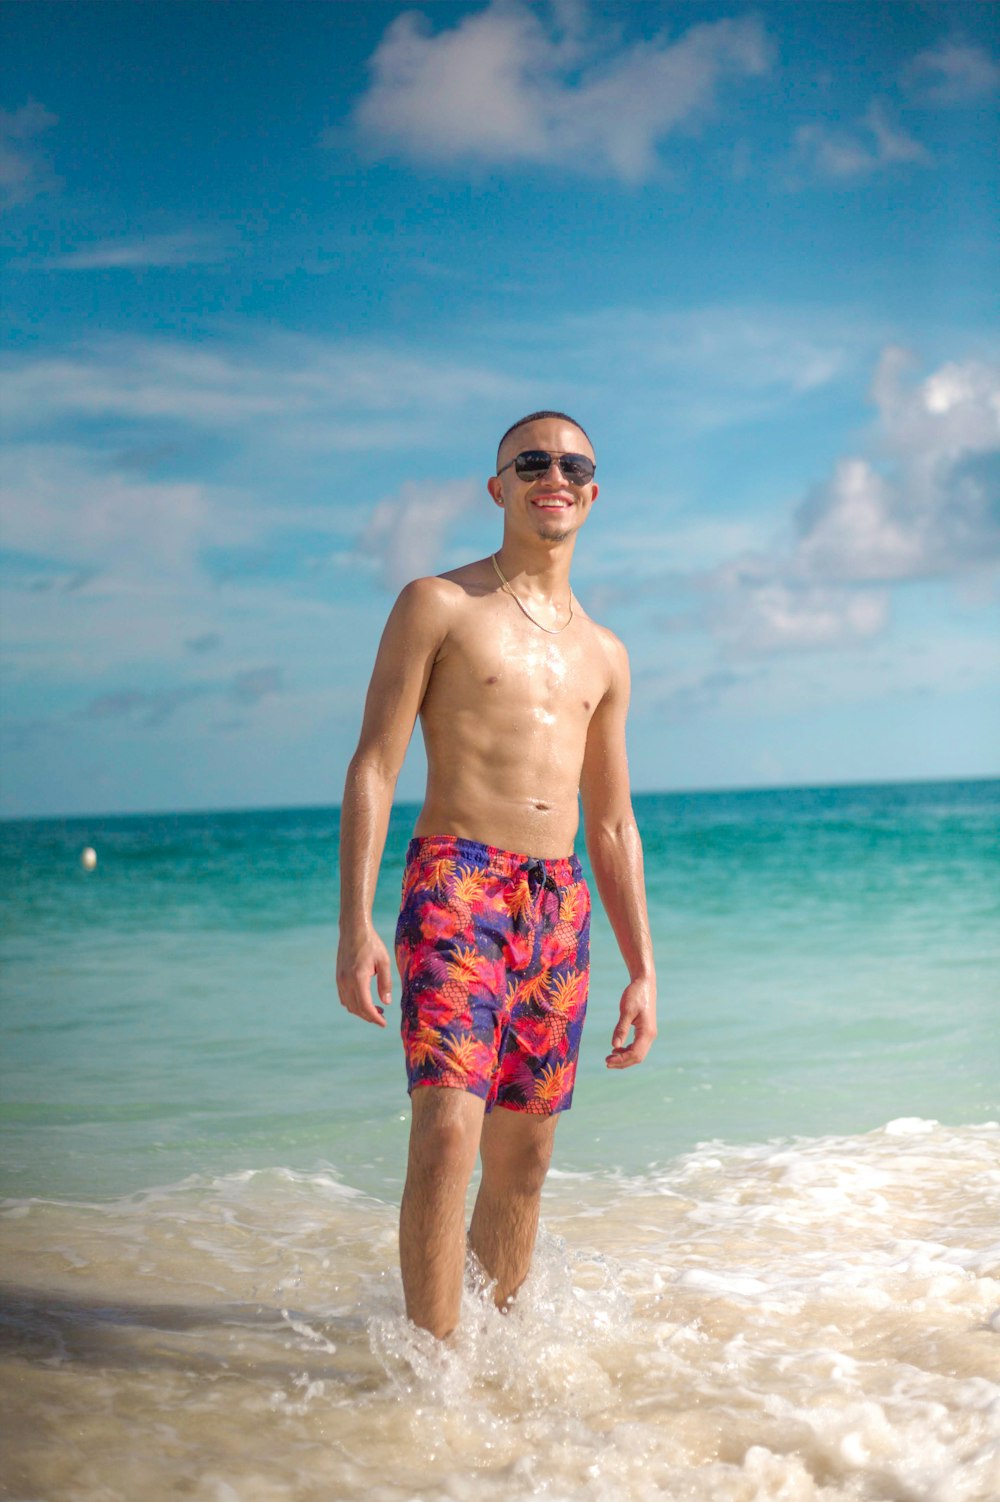 man in blue and red floral shorts wearing black sunglasses standing on beach during daytime